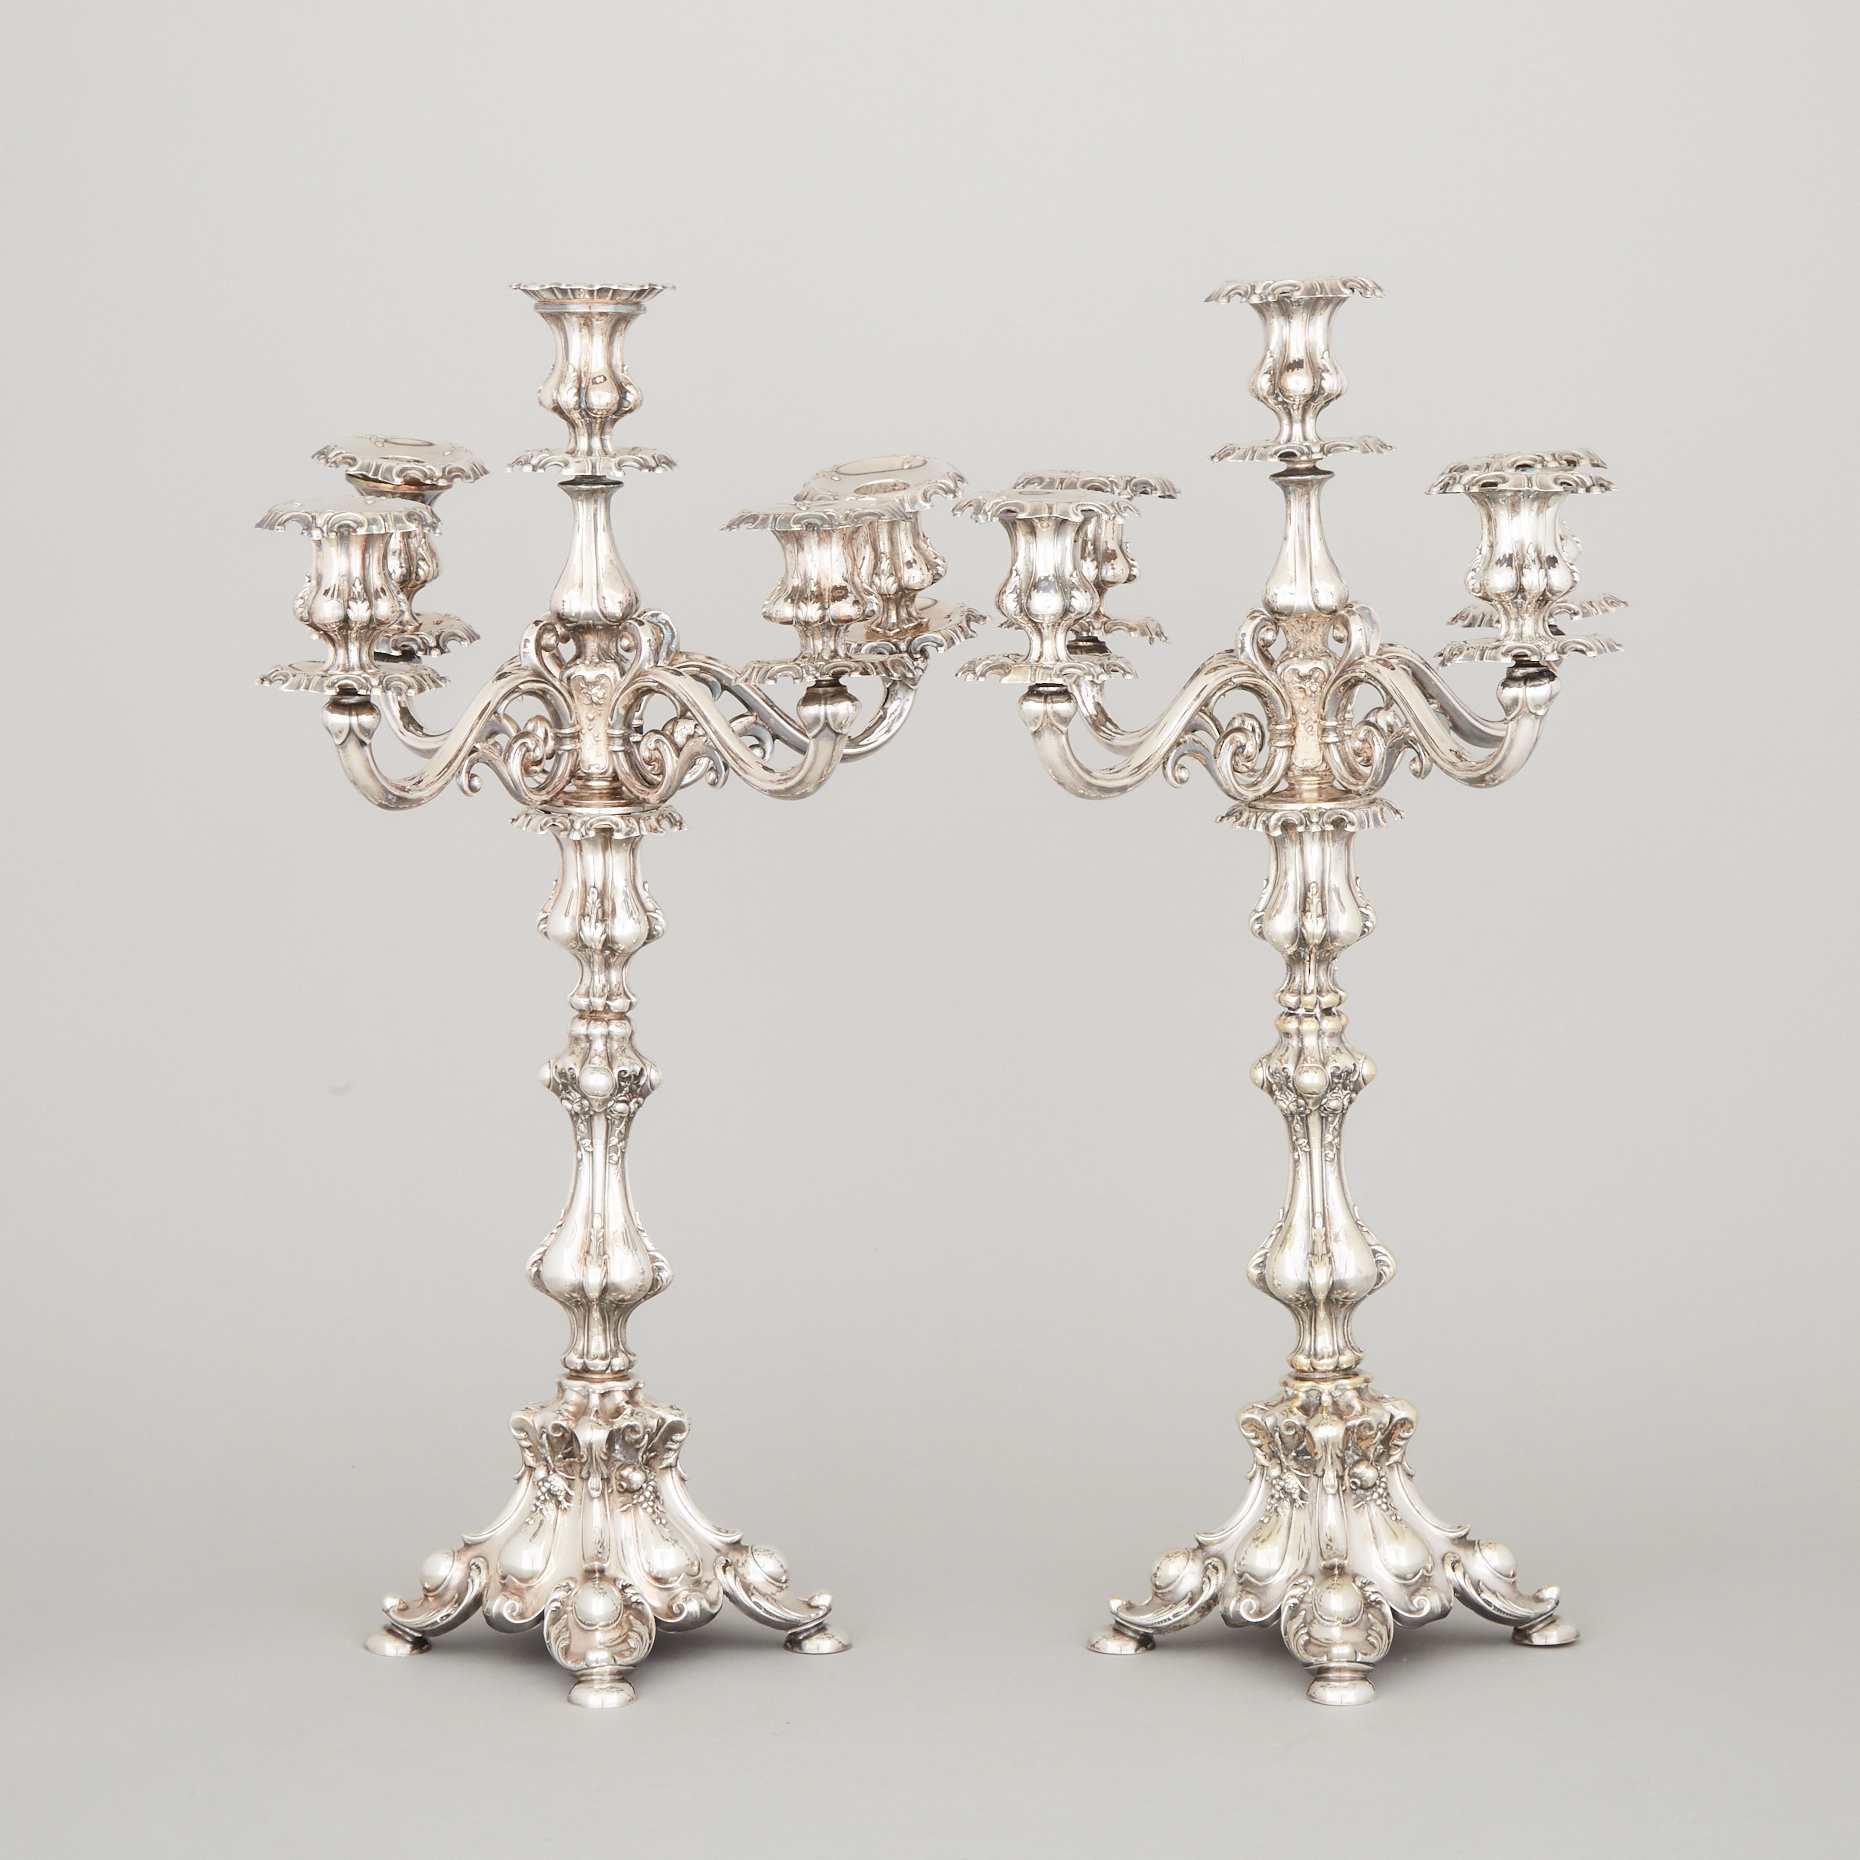 Pair of Continental Silver Plated Five-Light Candelabra, late 19th century